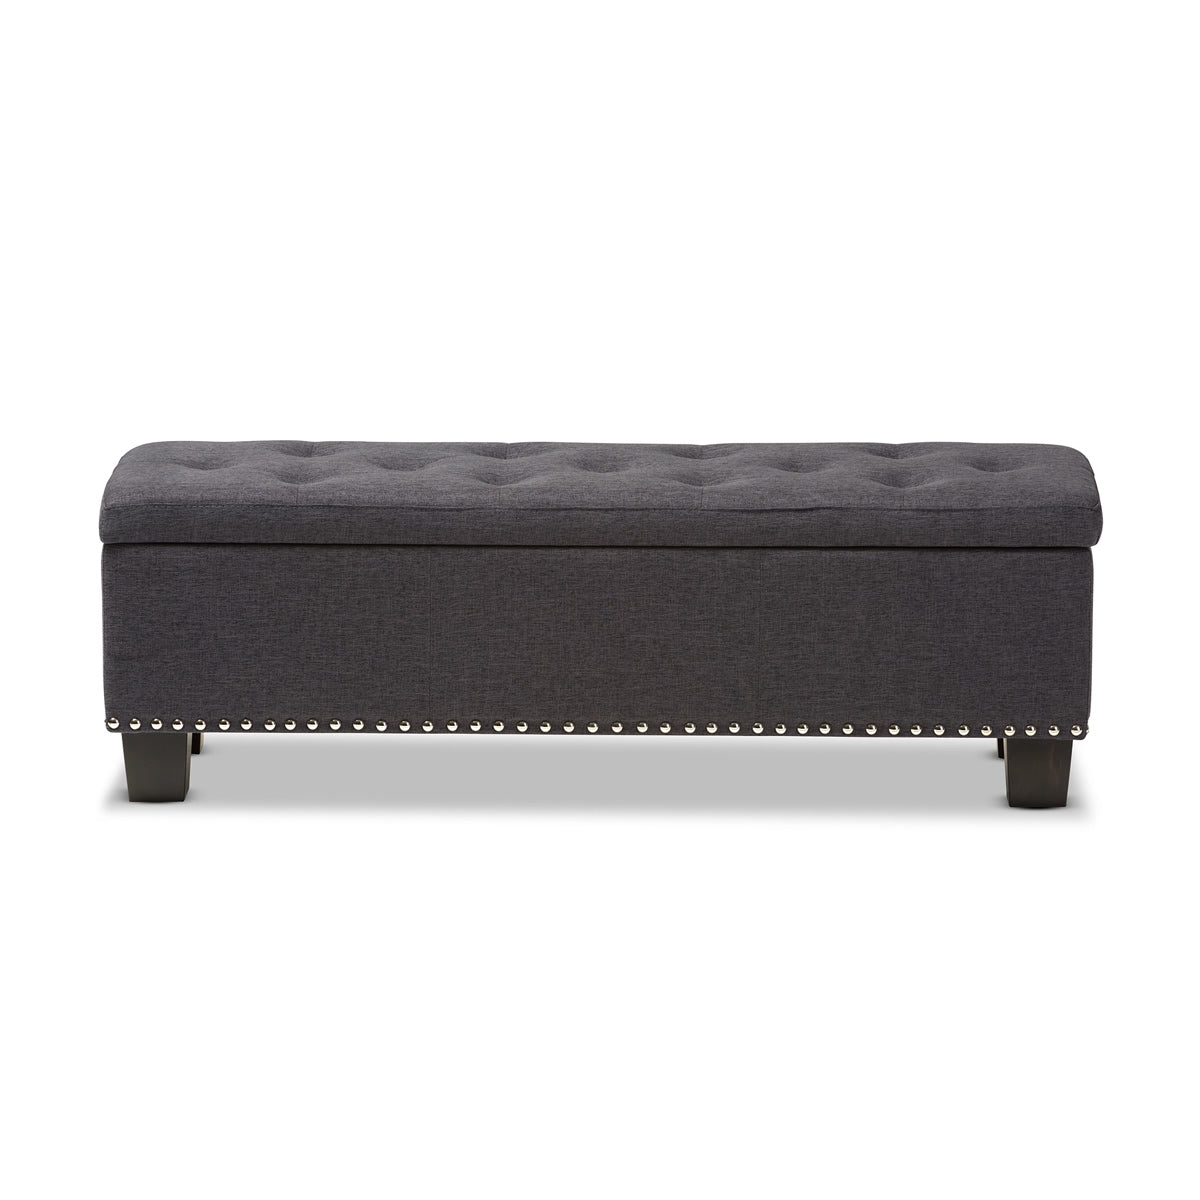 Baxton Studio Hannah Modern and Contemporary Dark Grey Fabric Upholstered Button-Tufting Storage Ottoman Bench Baxton Studio-benches-Minimal And Modern - 4